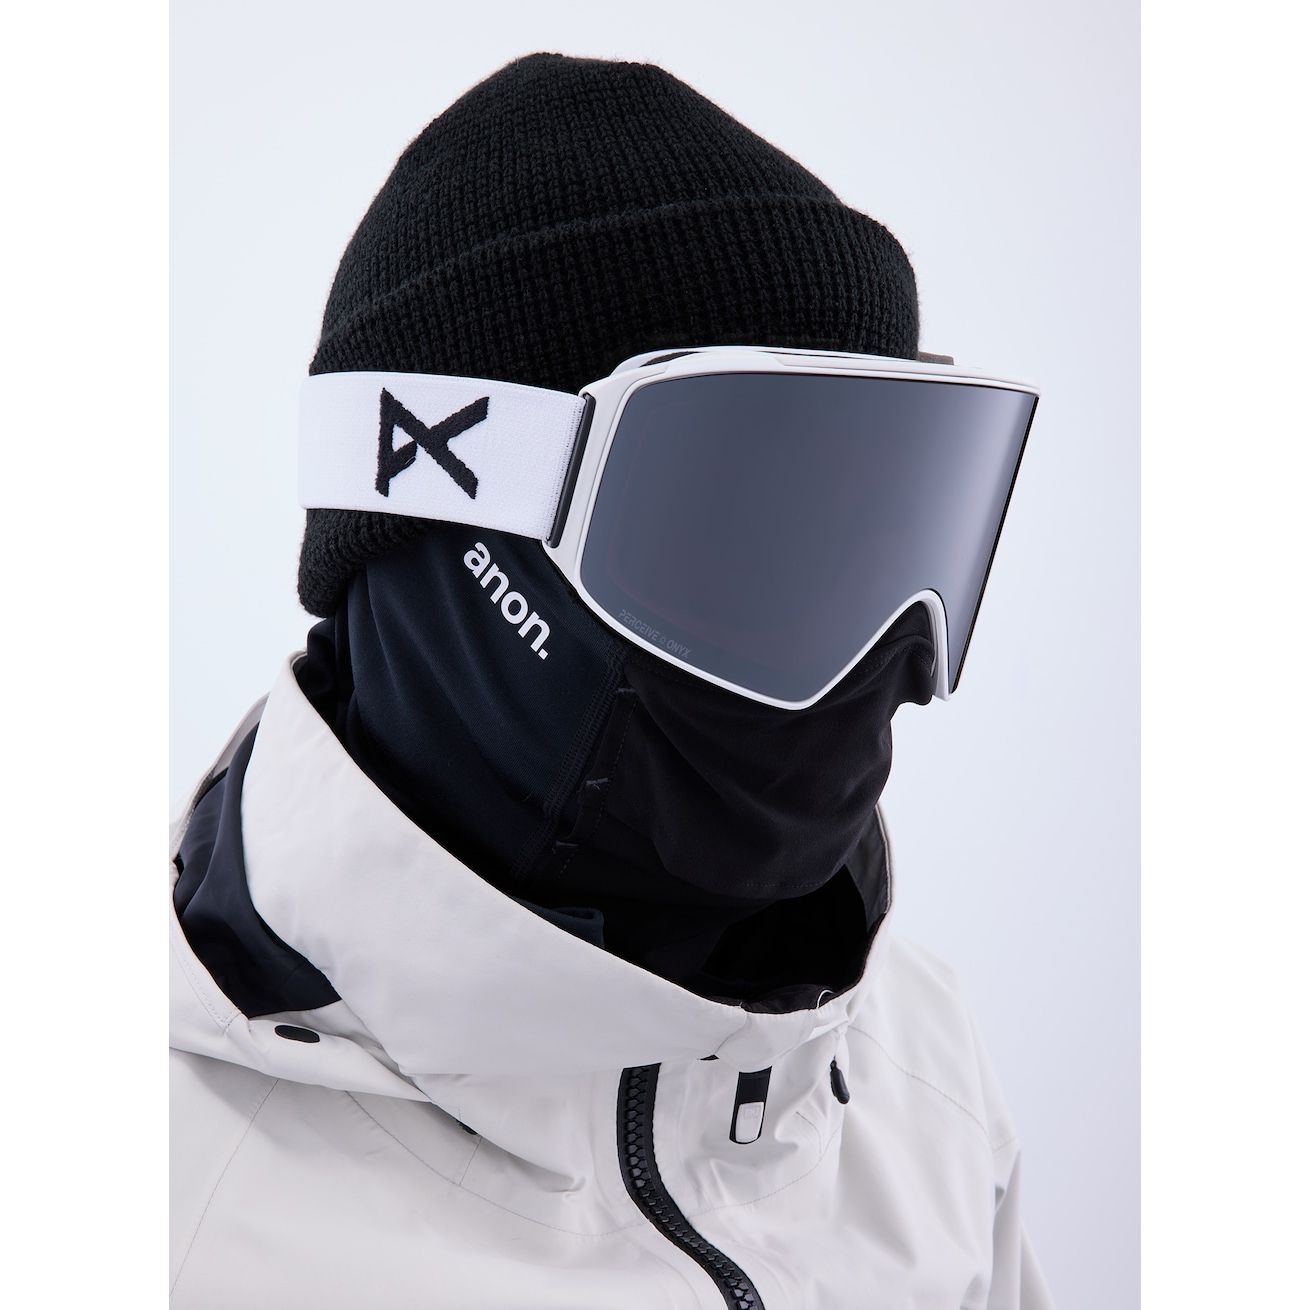 Anon M4 Cylindrical Goggles + Bonus Lens + MFI Face Mask - Openbox White Perceive Sunny Onyx - Anon Snow Goggles